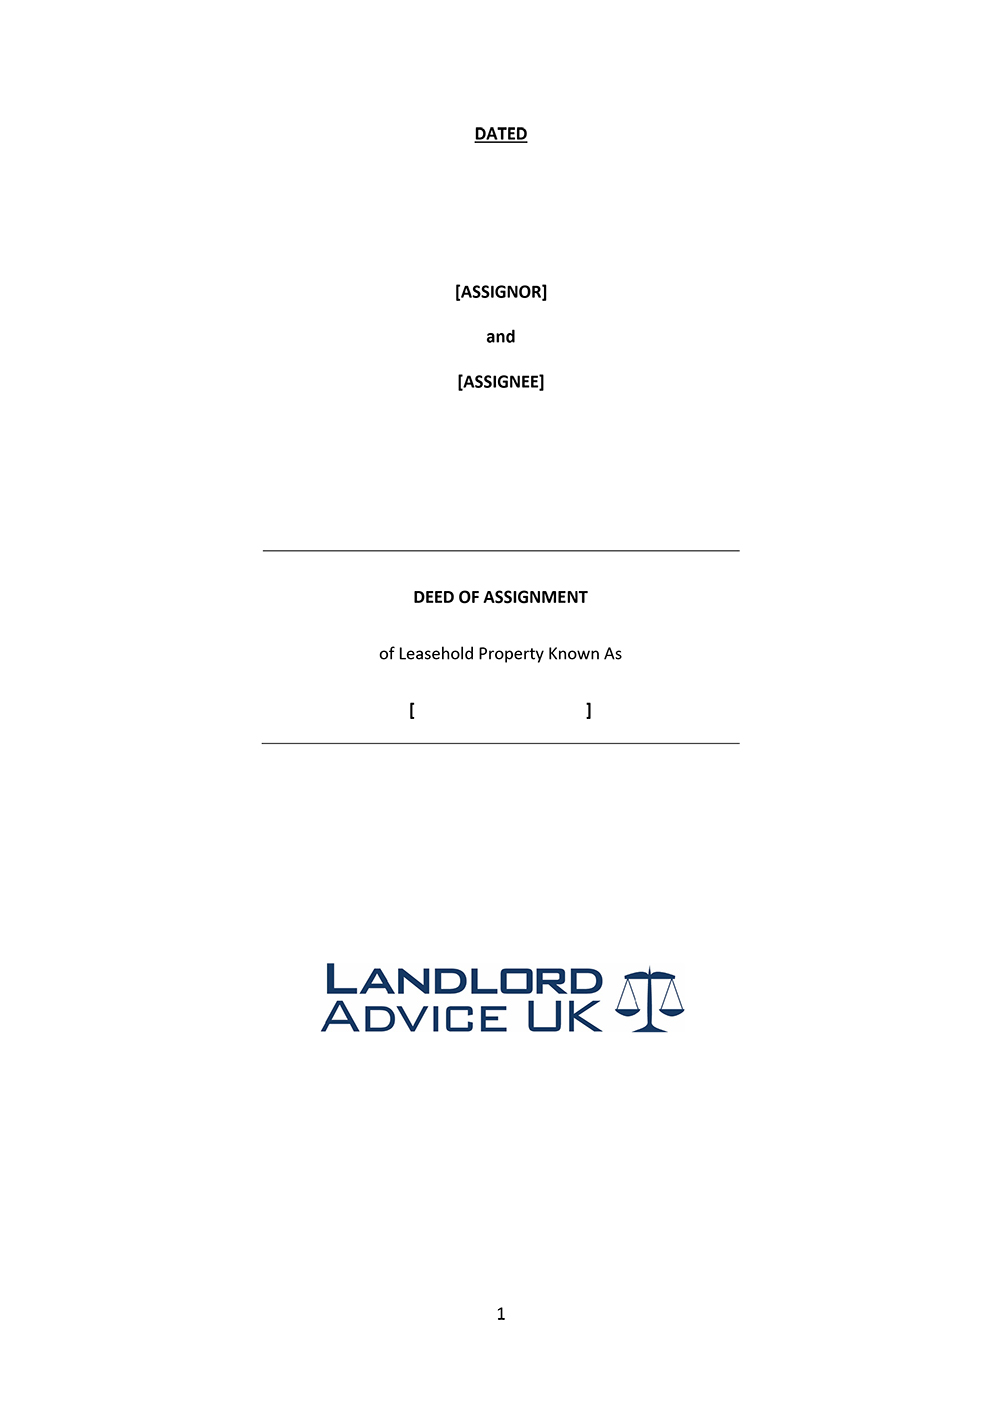 Deed of Assignment of Lease 6